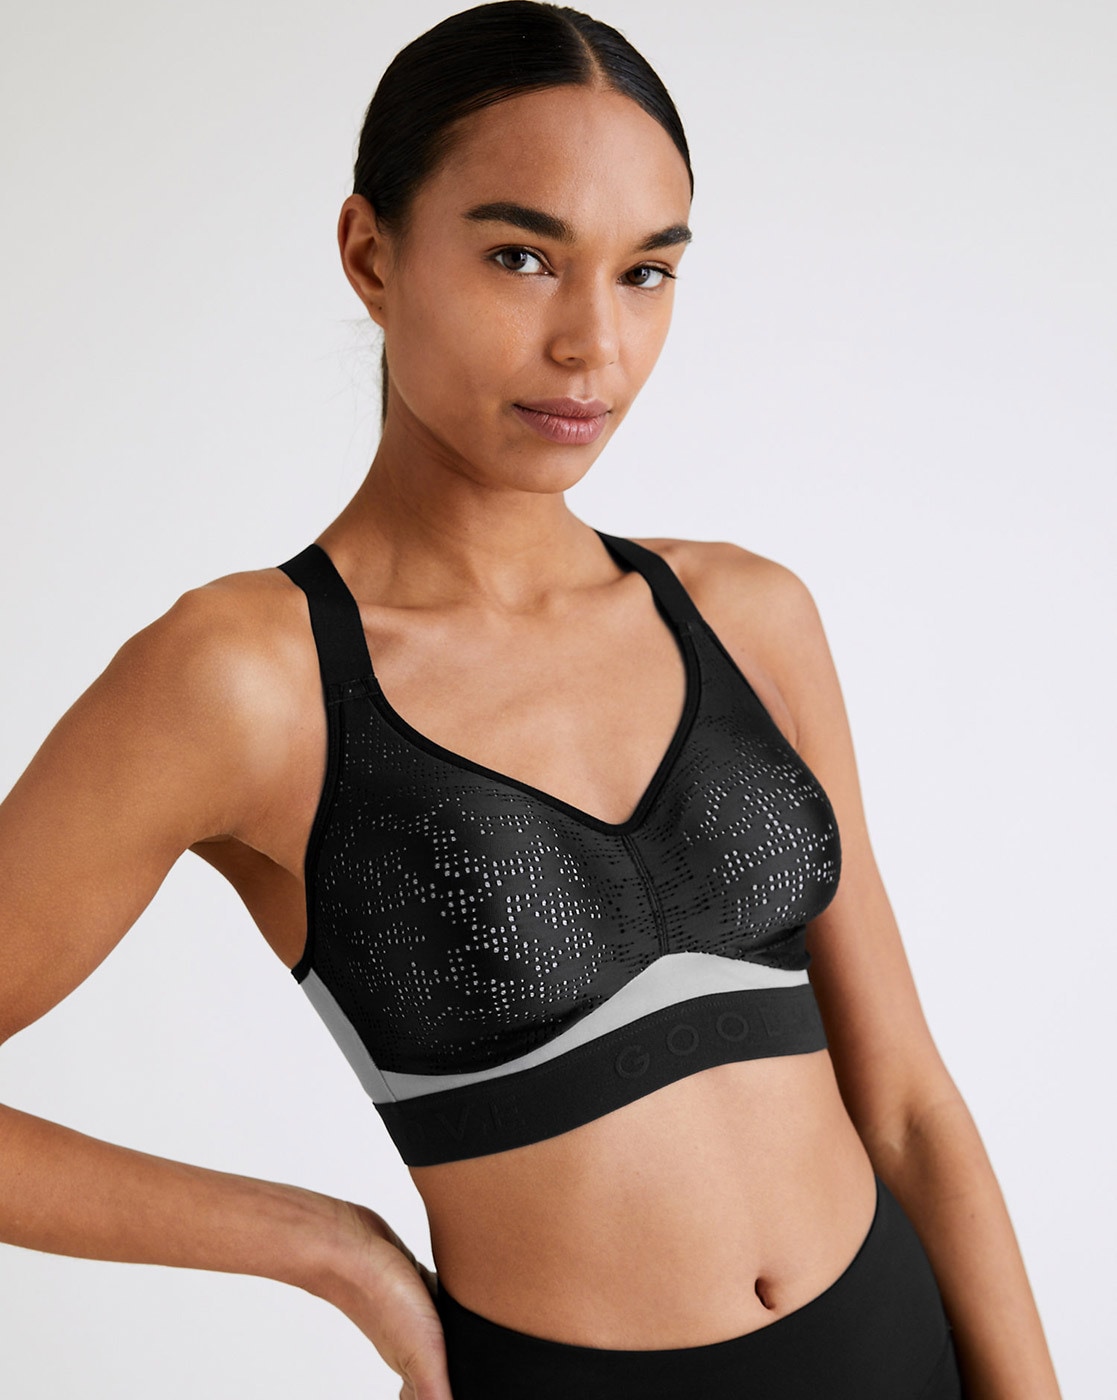 M&S GOOD MOVE FREEDOM TO MOVE NON WIRED HIGH IMPACT Sports BRA in